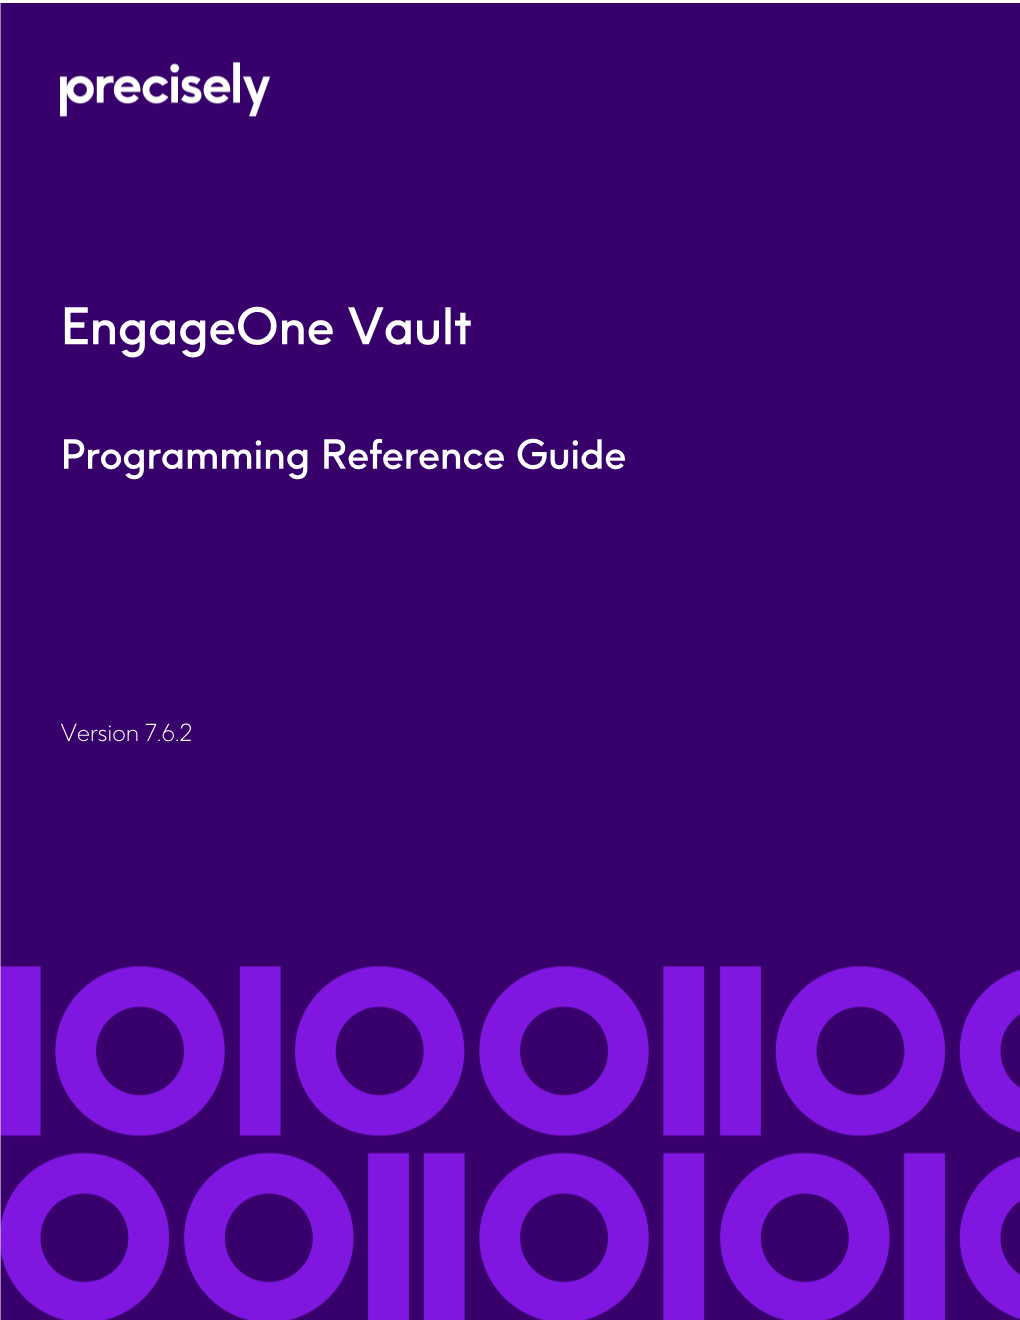 Engageone Vault Programming Reference Guide V7.6.2